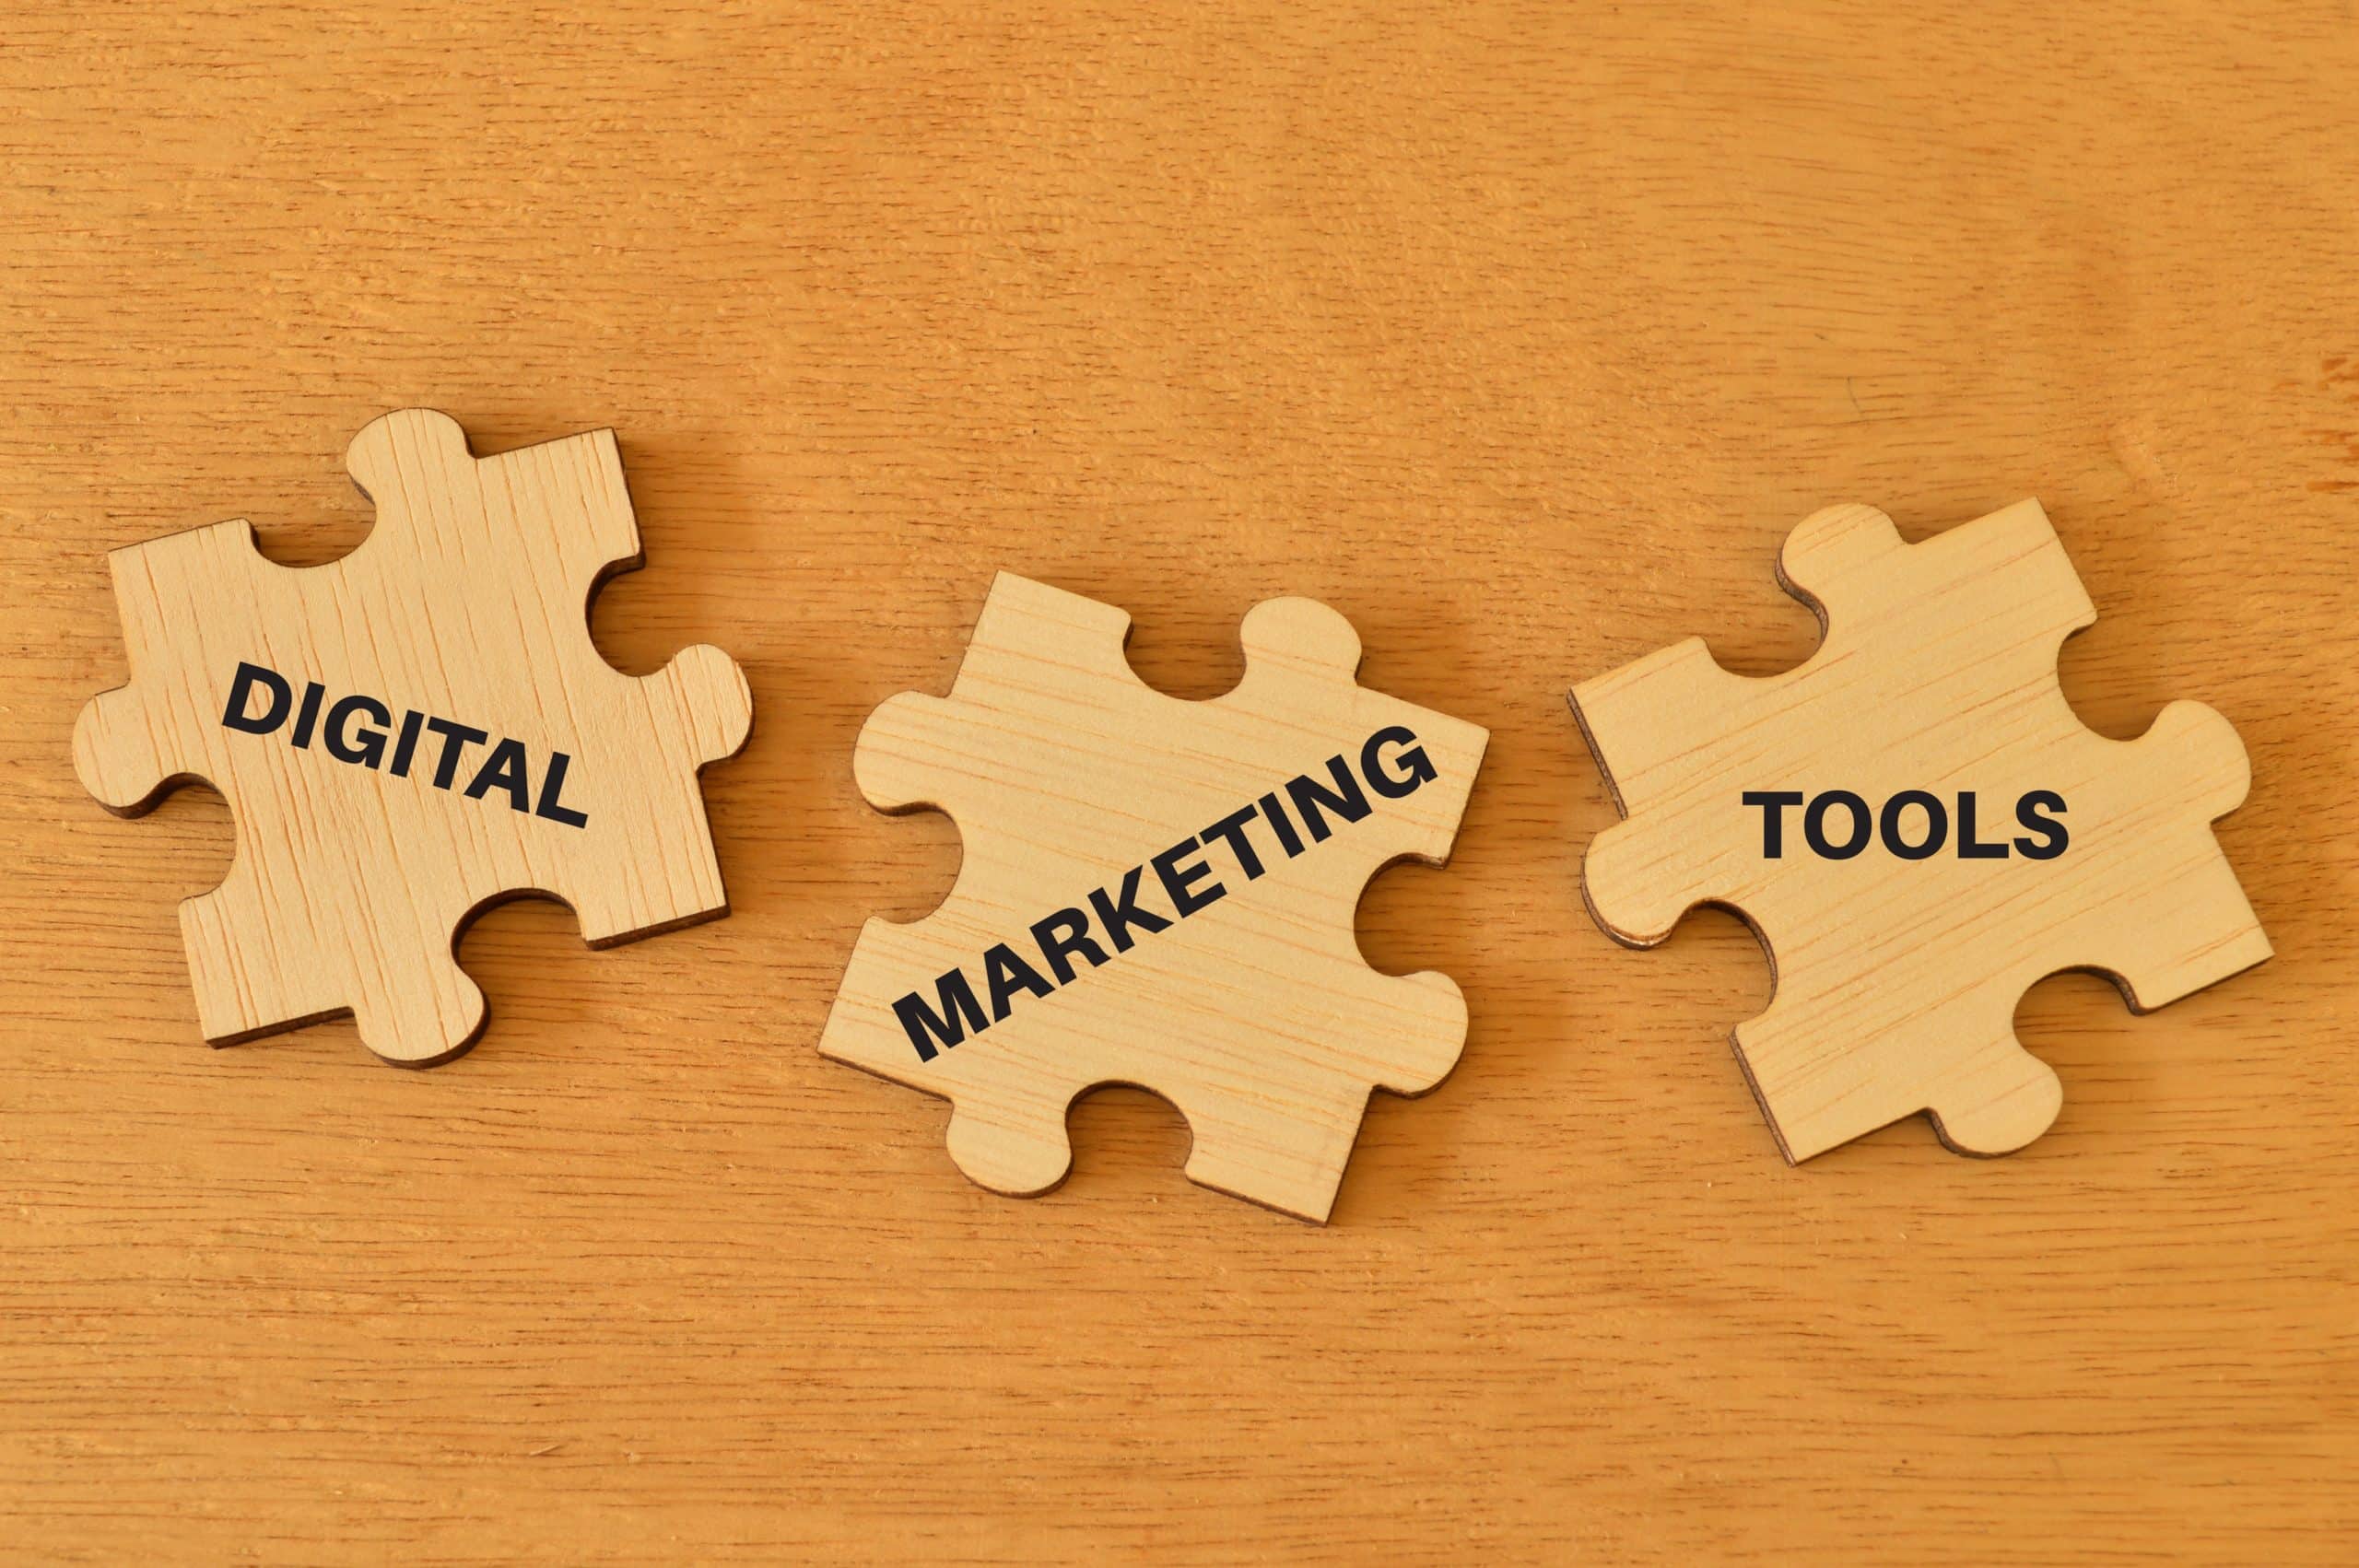 Three puzzle pieces on a wooden surface with the words "Digital Marketing" printed on them.